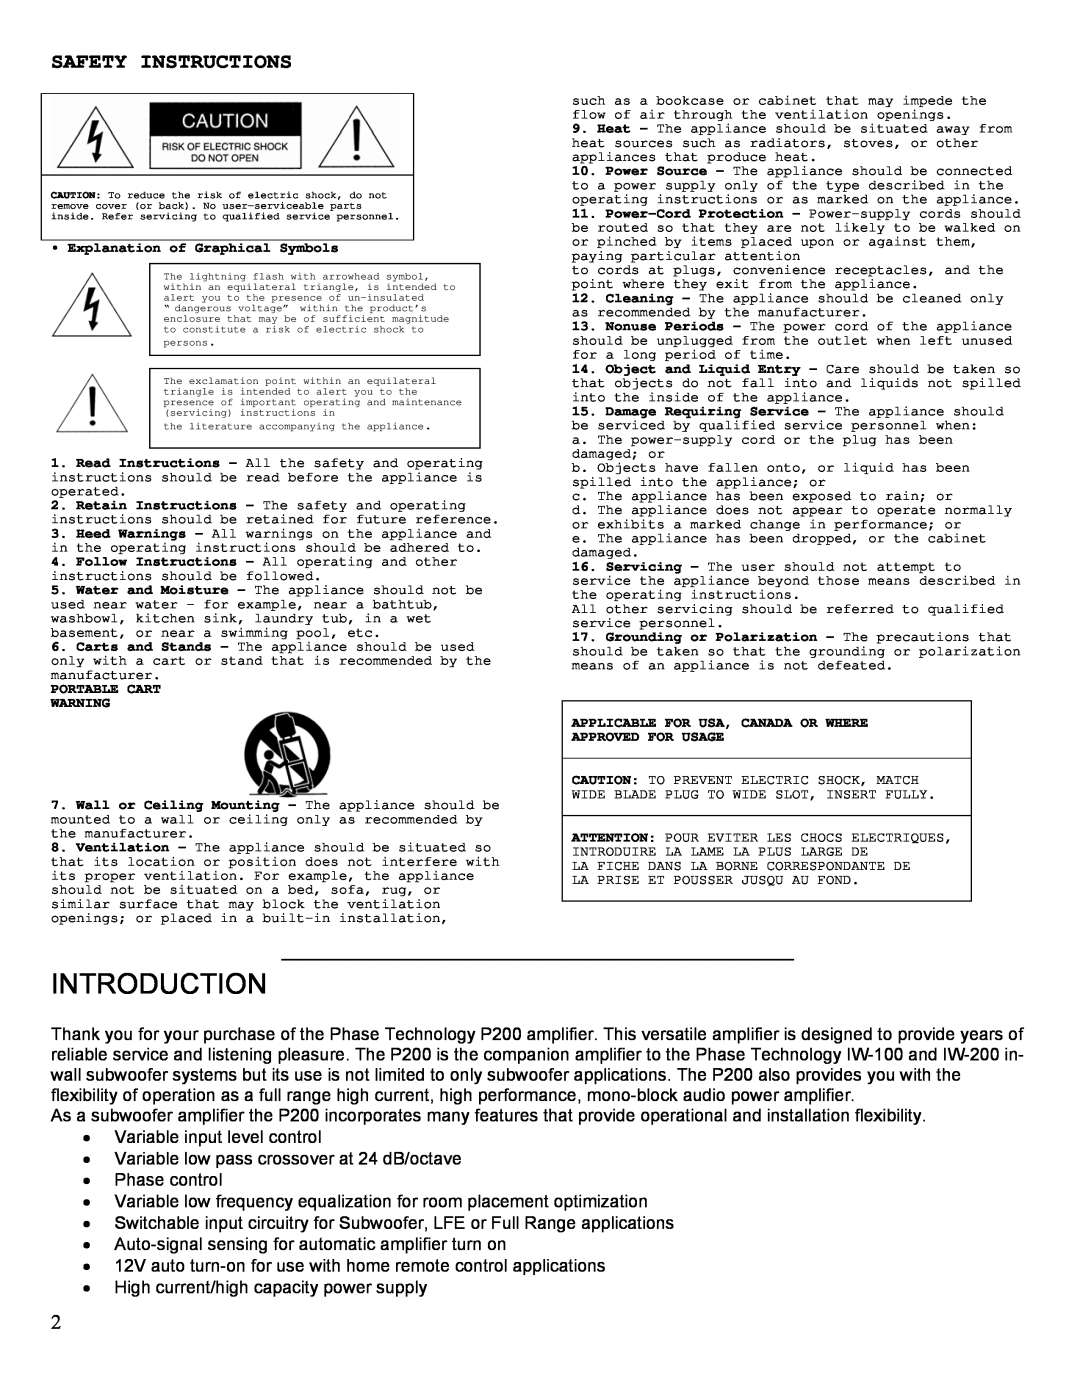 Phase Technology P-200 manual Introduction, Safety Instructions 